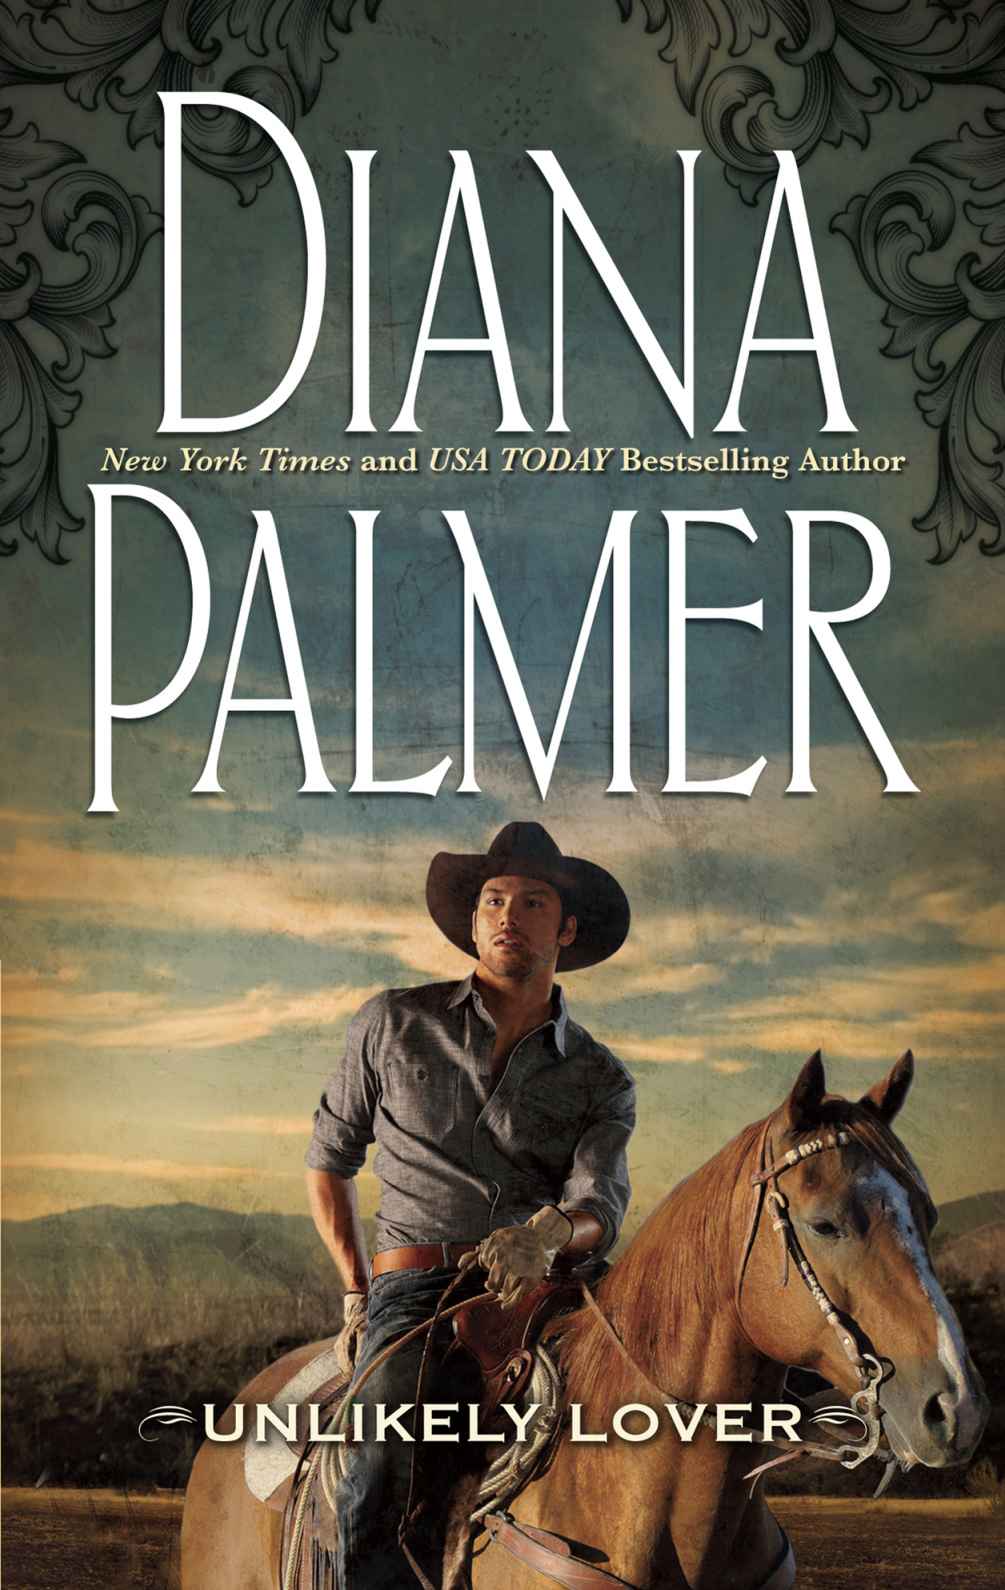 Unlikely Lover by Diana Palmer